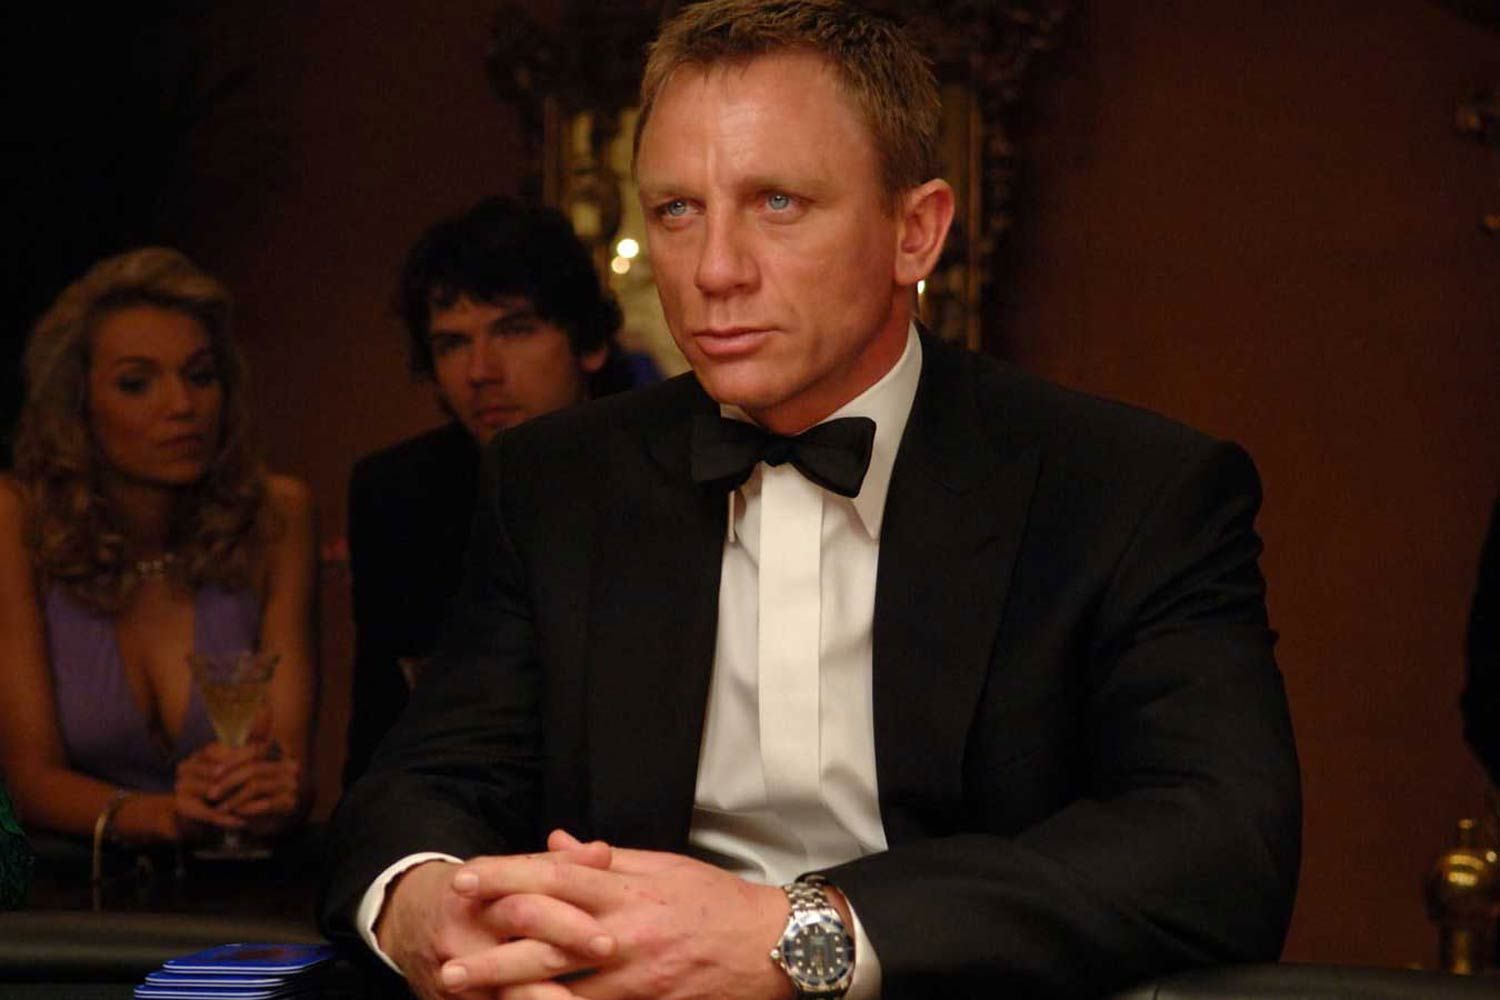 Daniel Craig as Bond in the 2006 film, Casino Royale wearing the Seamaster 300m in his Brioni tuxedo (Image: omegawatches.com)